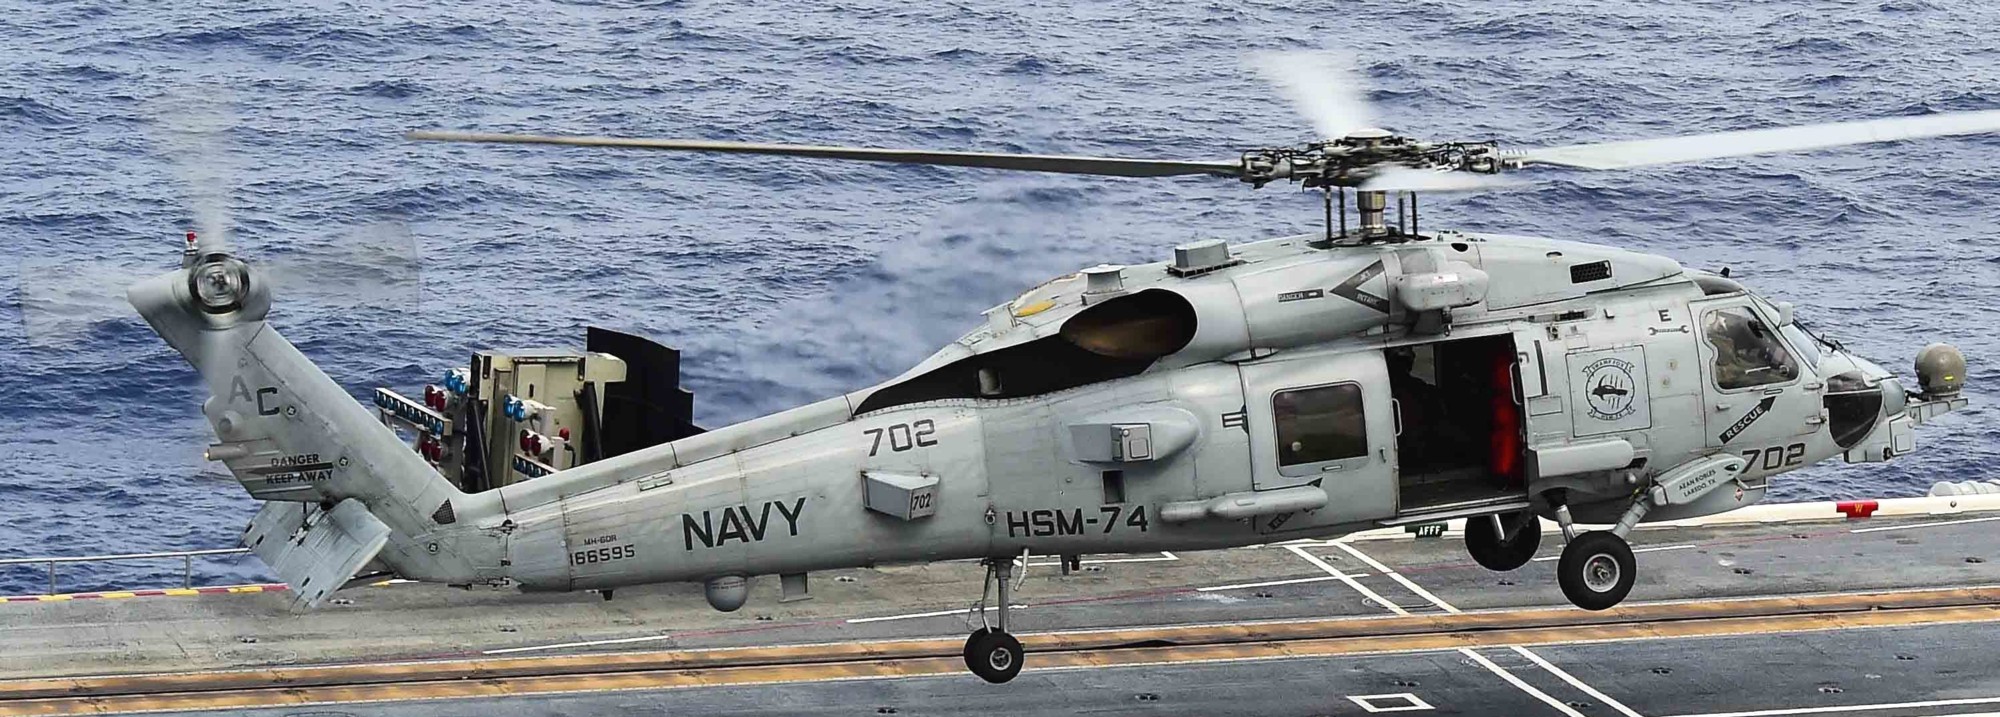 hsm-74 swamp foxes helicopter maritime strike squadron us navy mh-60r seahawk 2015 80